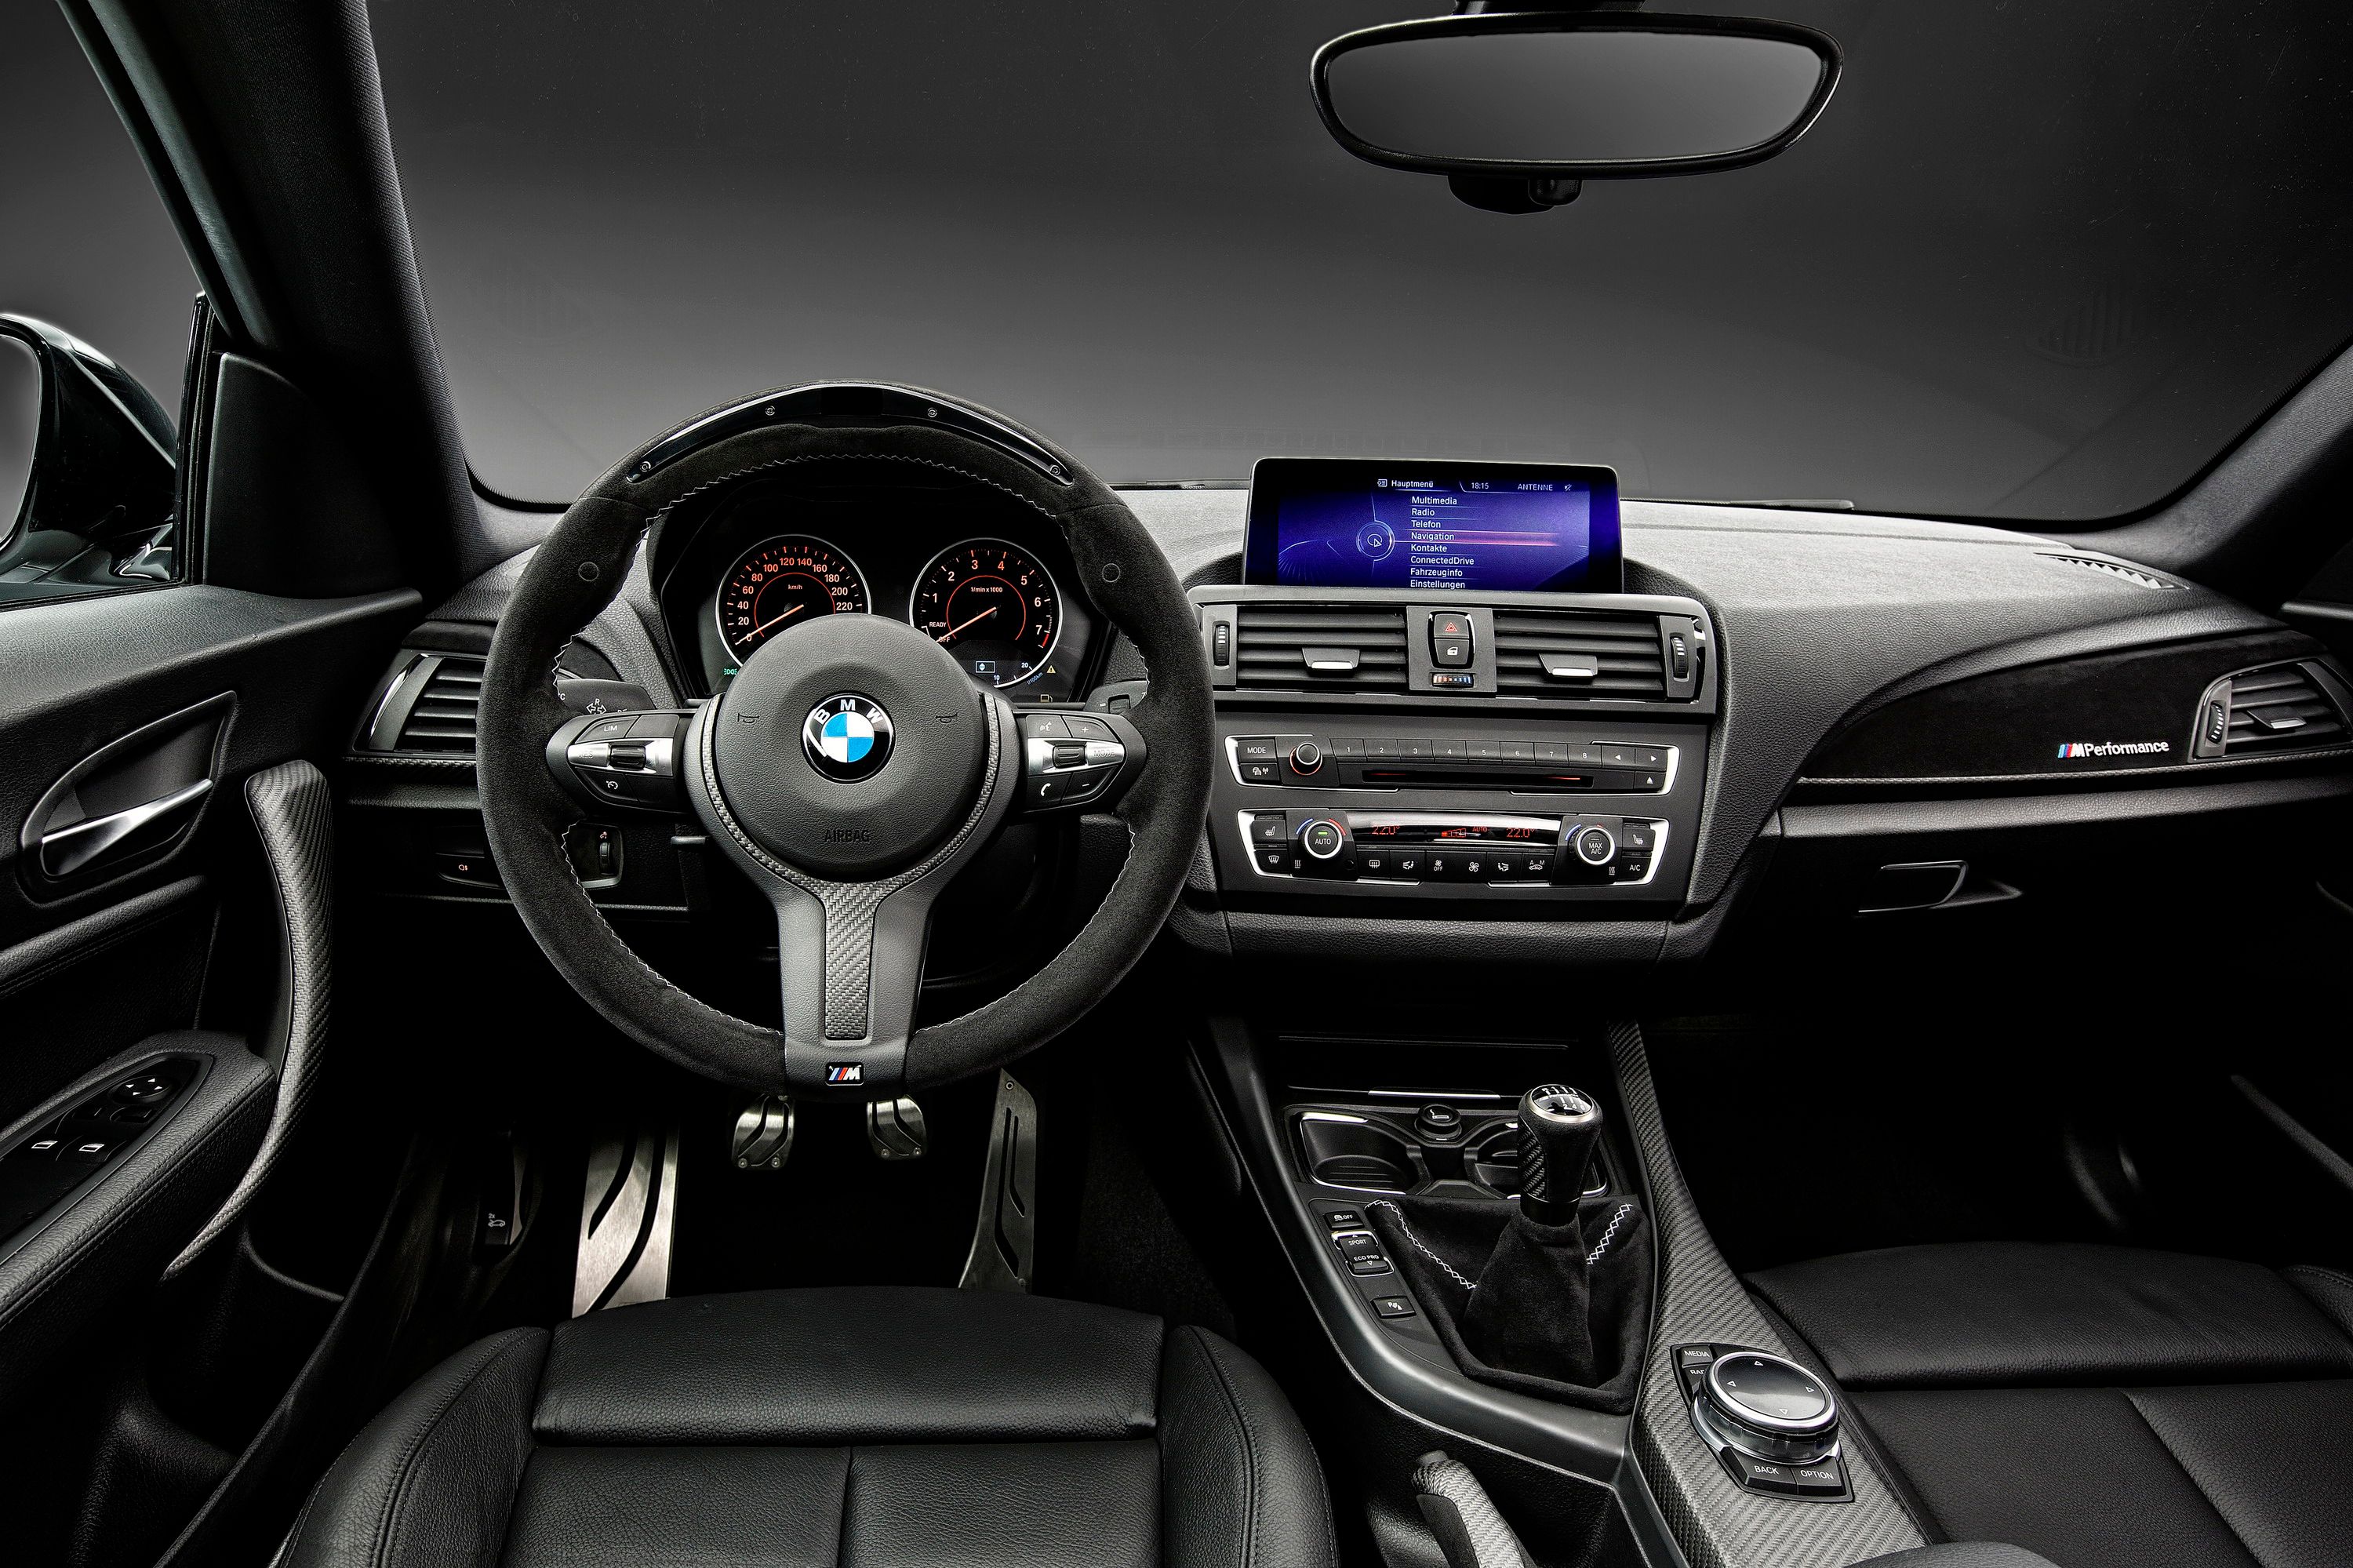 2014 BMW 2 Series Coupe with M Performance parts